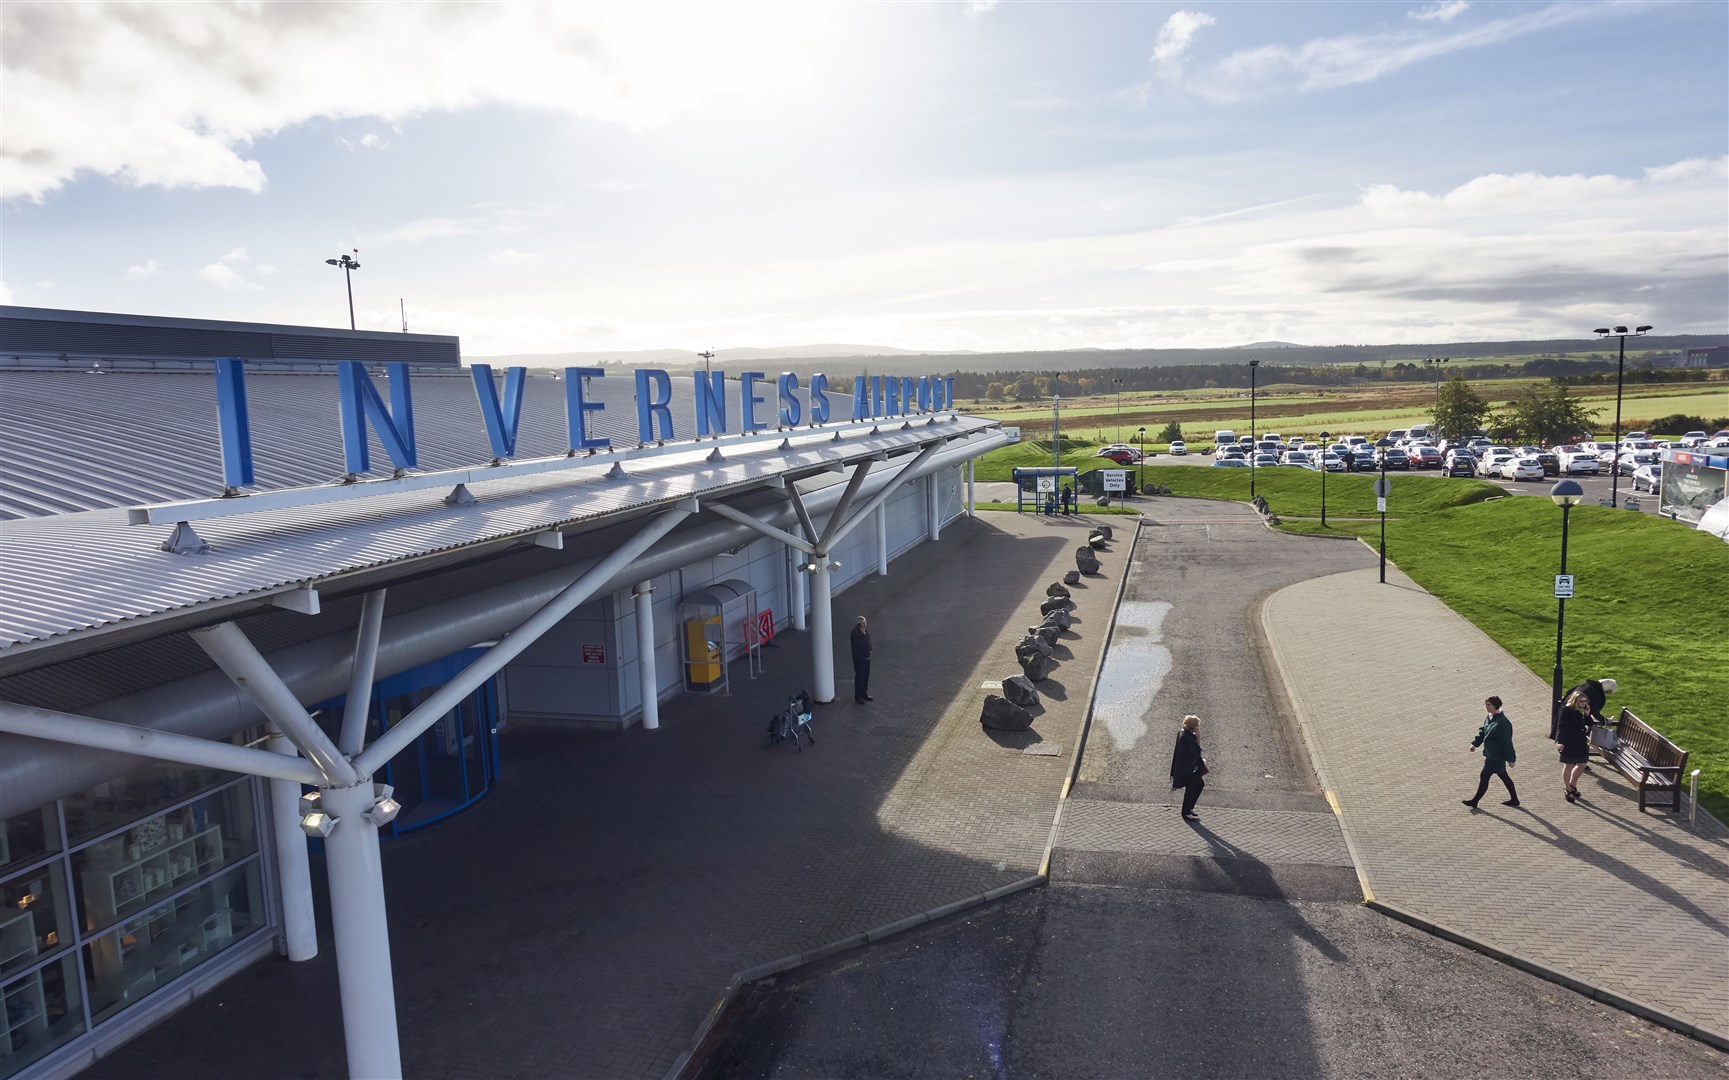 Inverness Airport operator HIAL wants to develop a new system that will mitigate wind farm impacts on current air traffic operations.